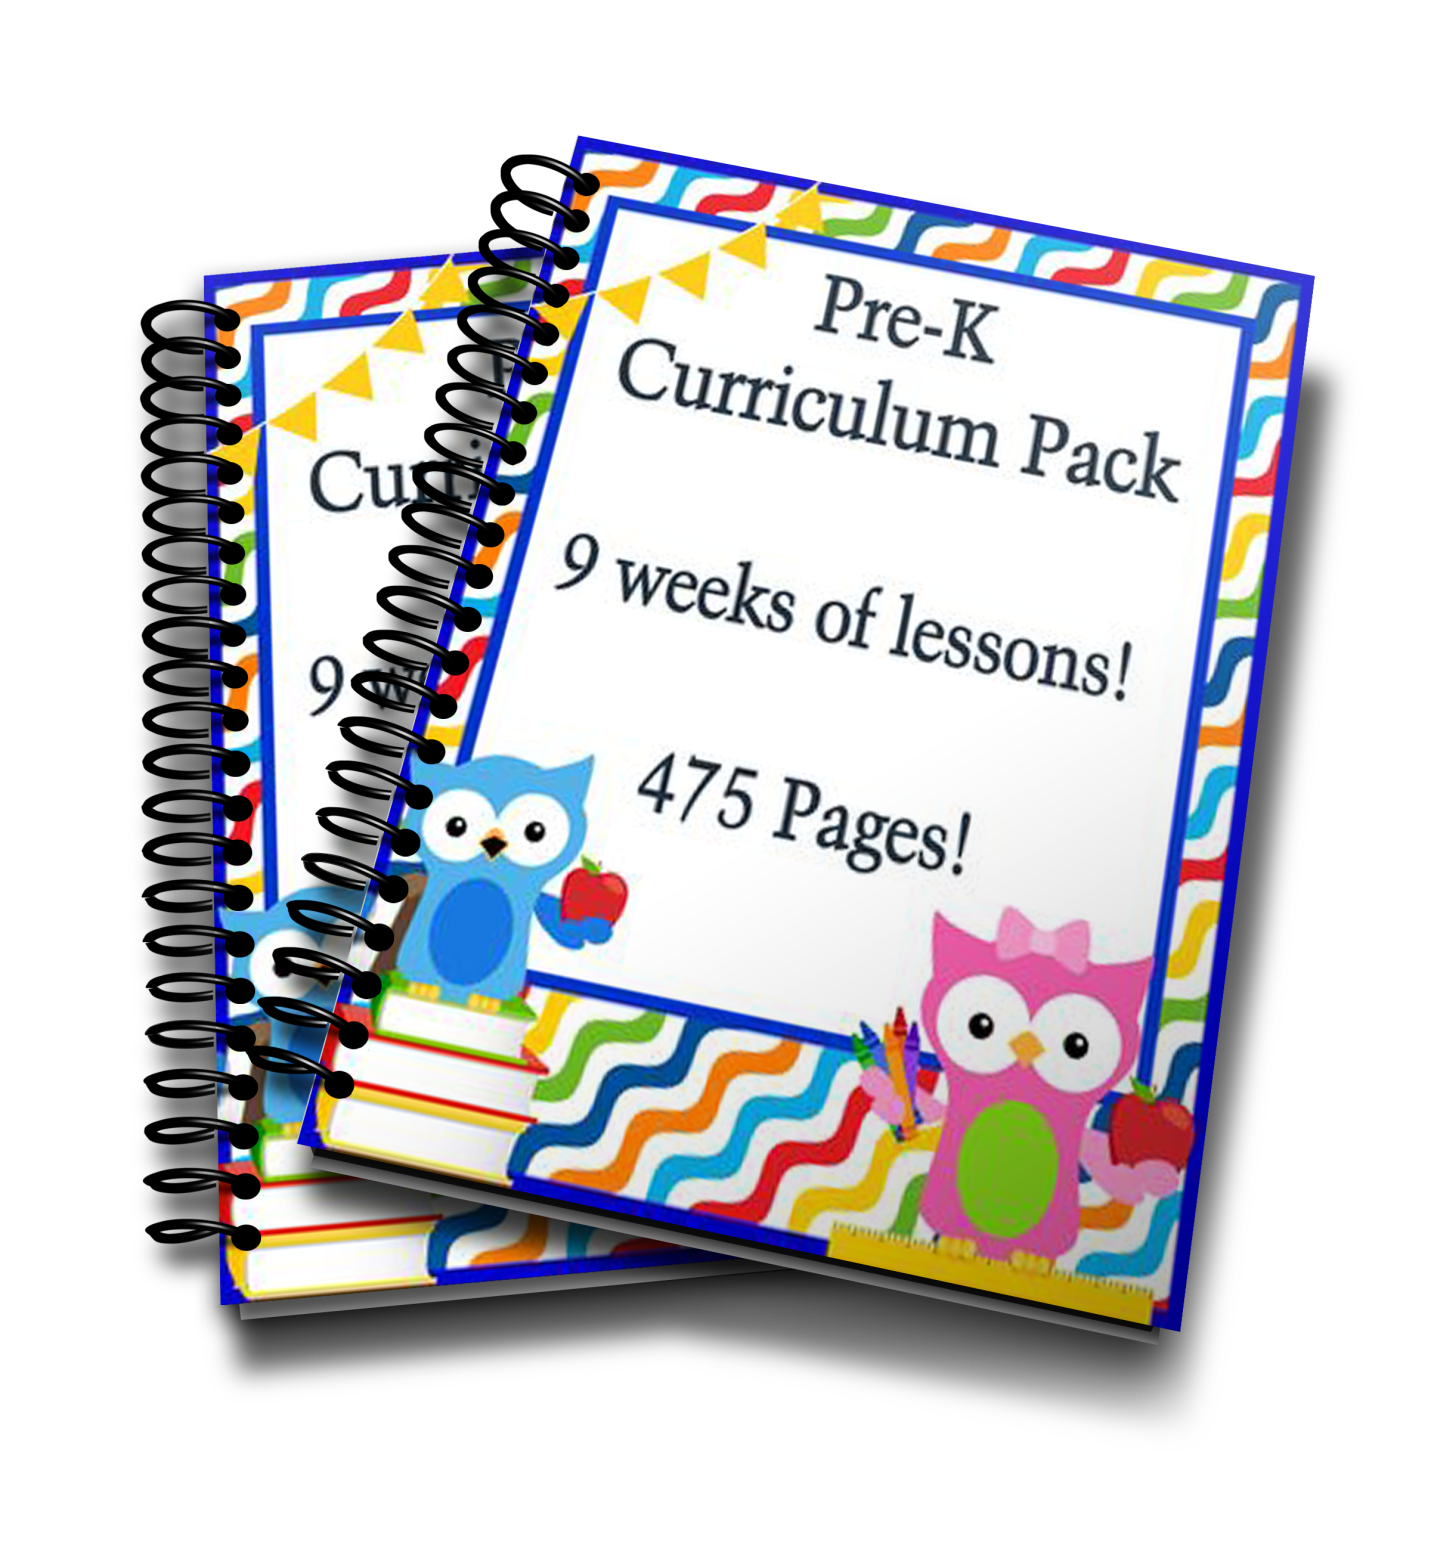 Curriculum clipart preschool curriculum. Everything they need to